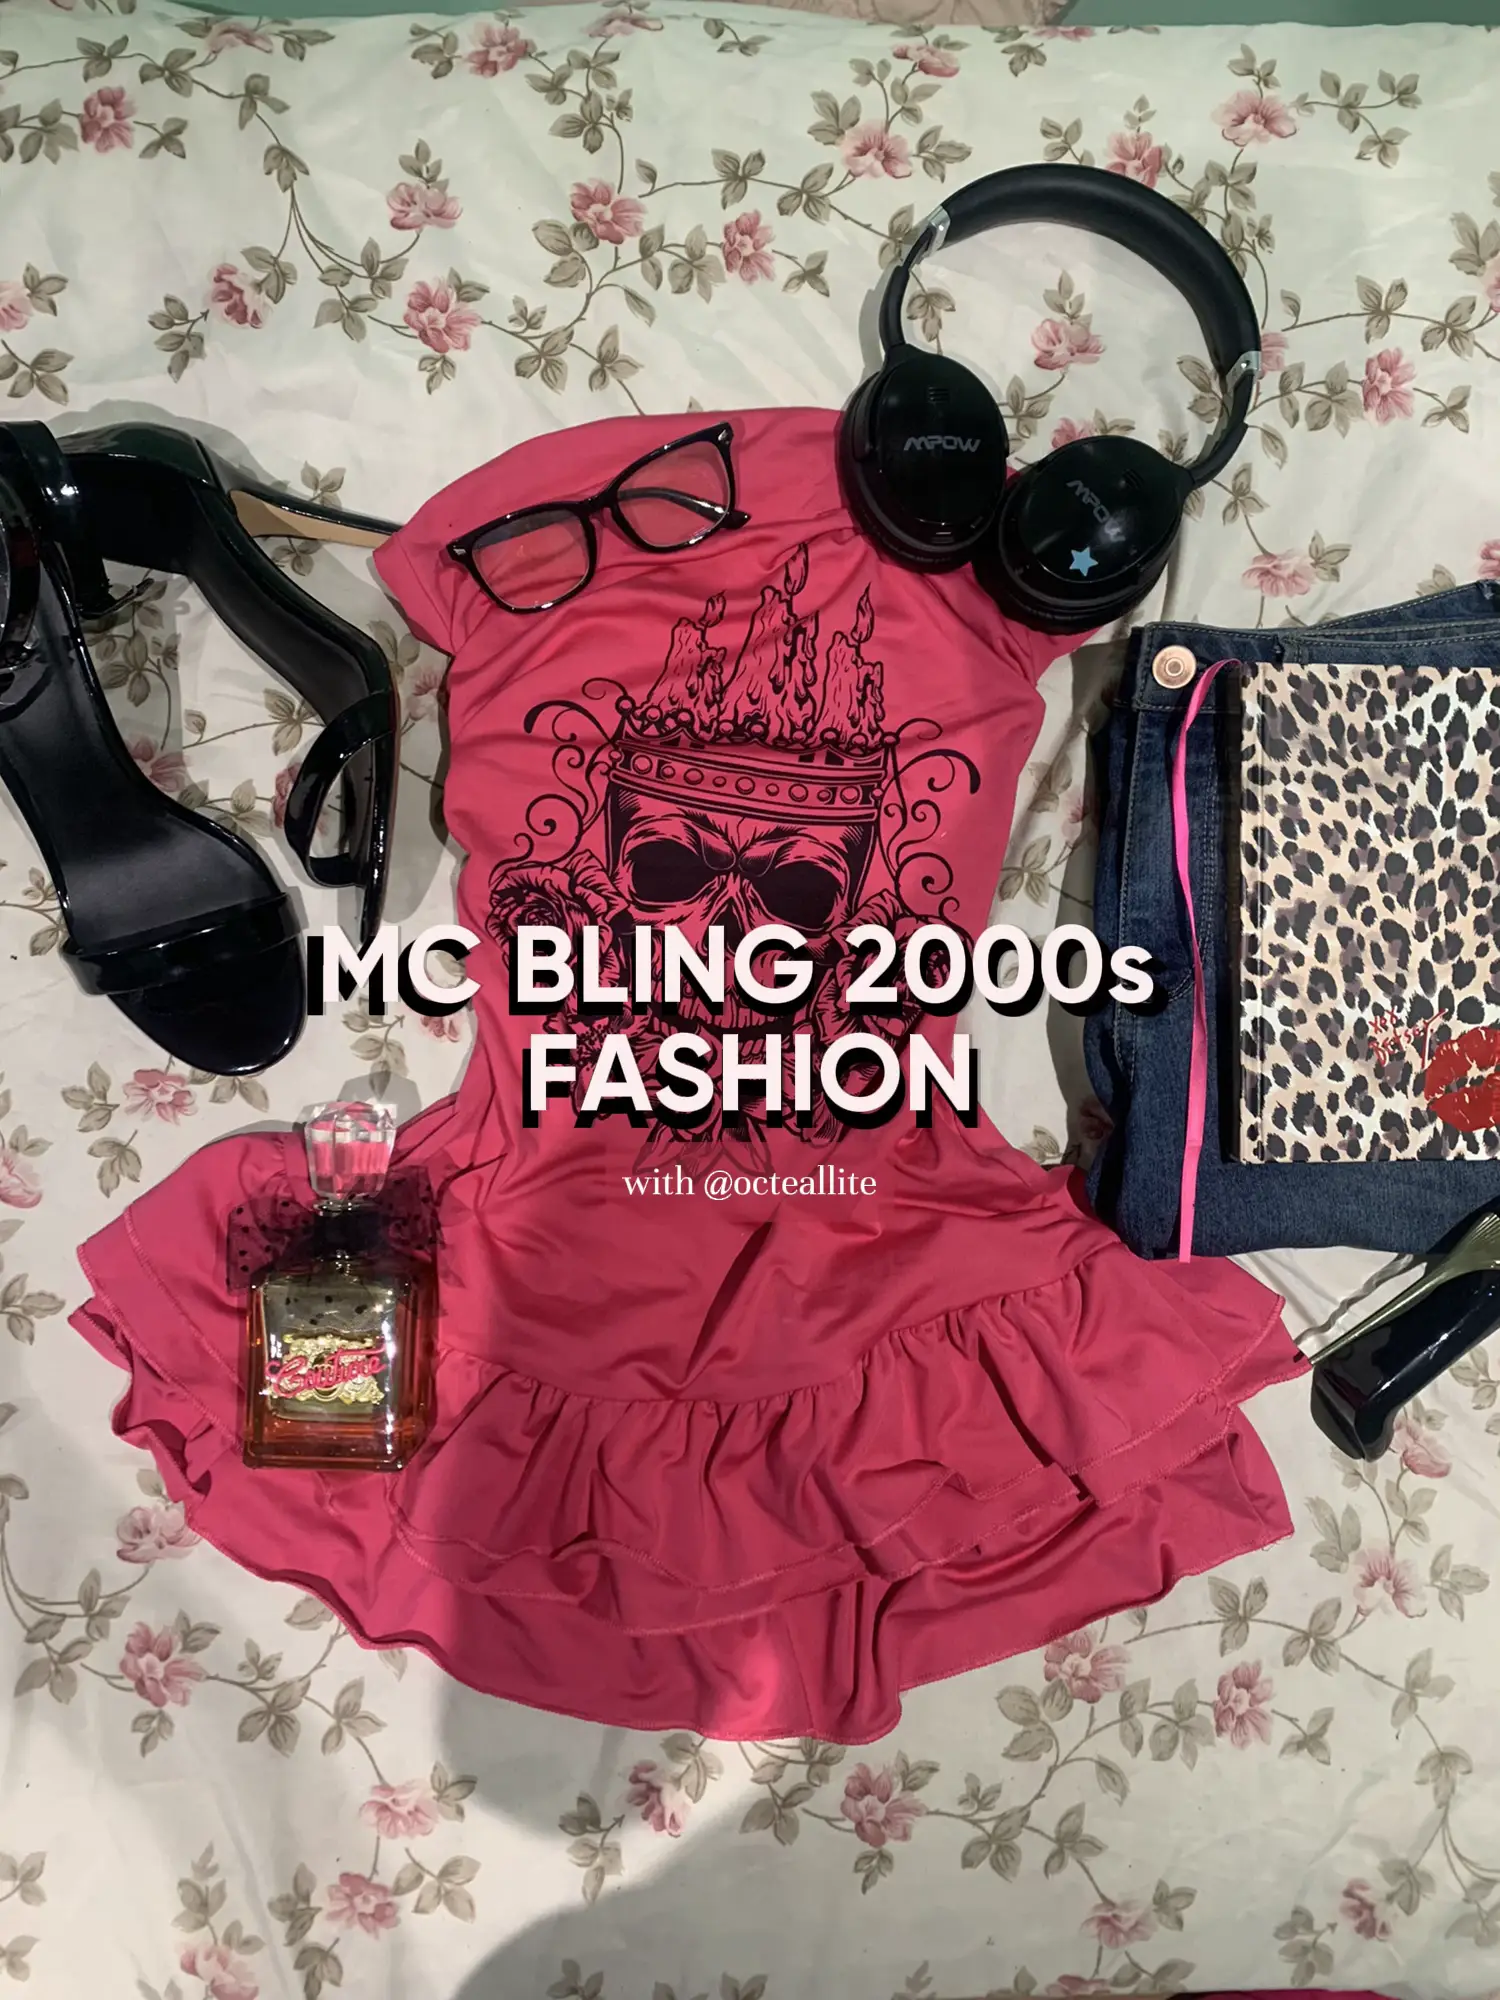 victoria's secret  2000s fashion outfits, Mcbling fashion, Pink outfits